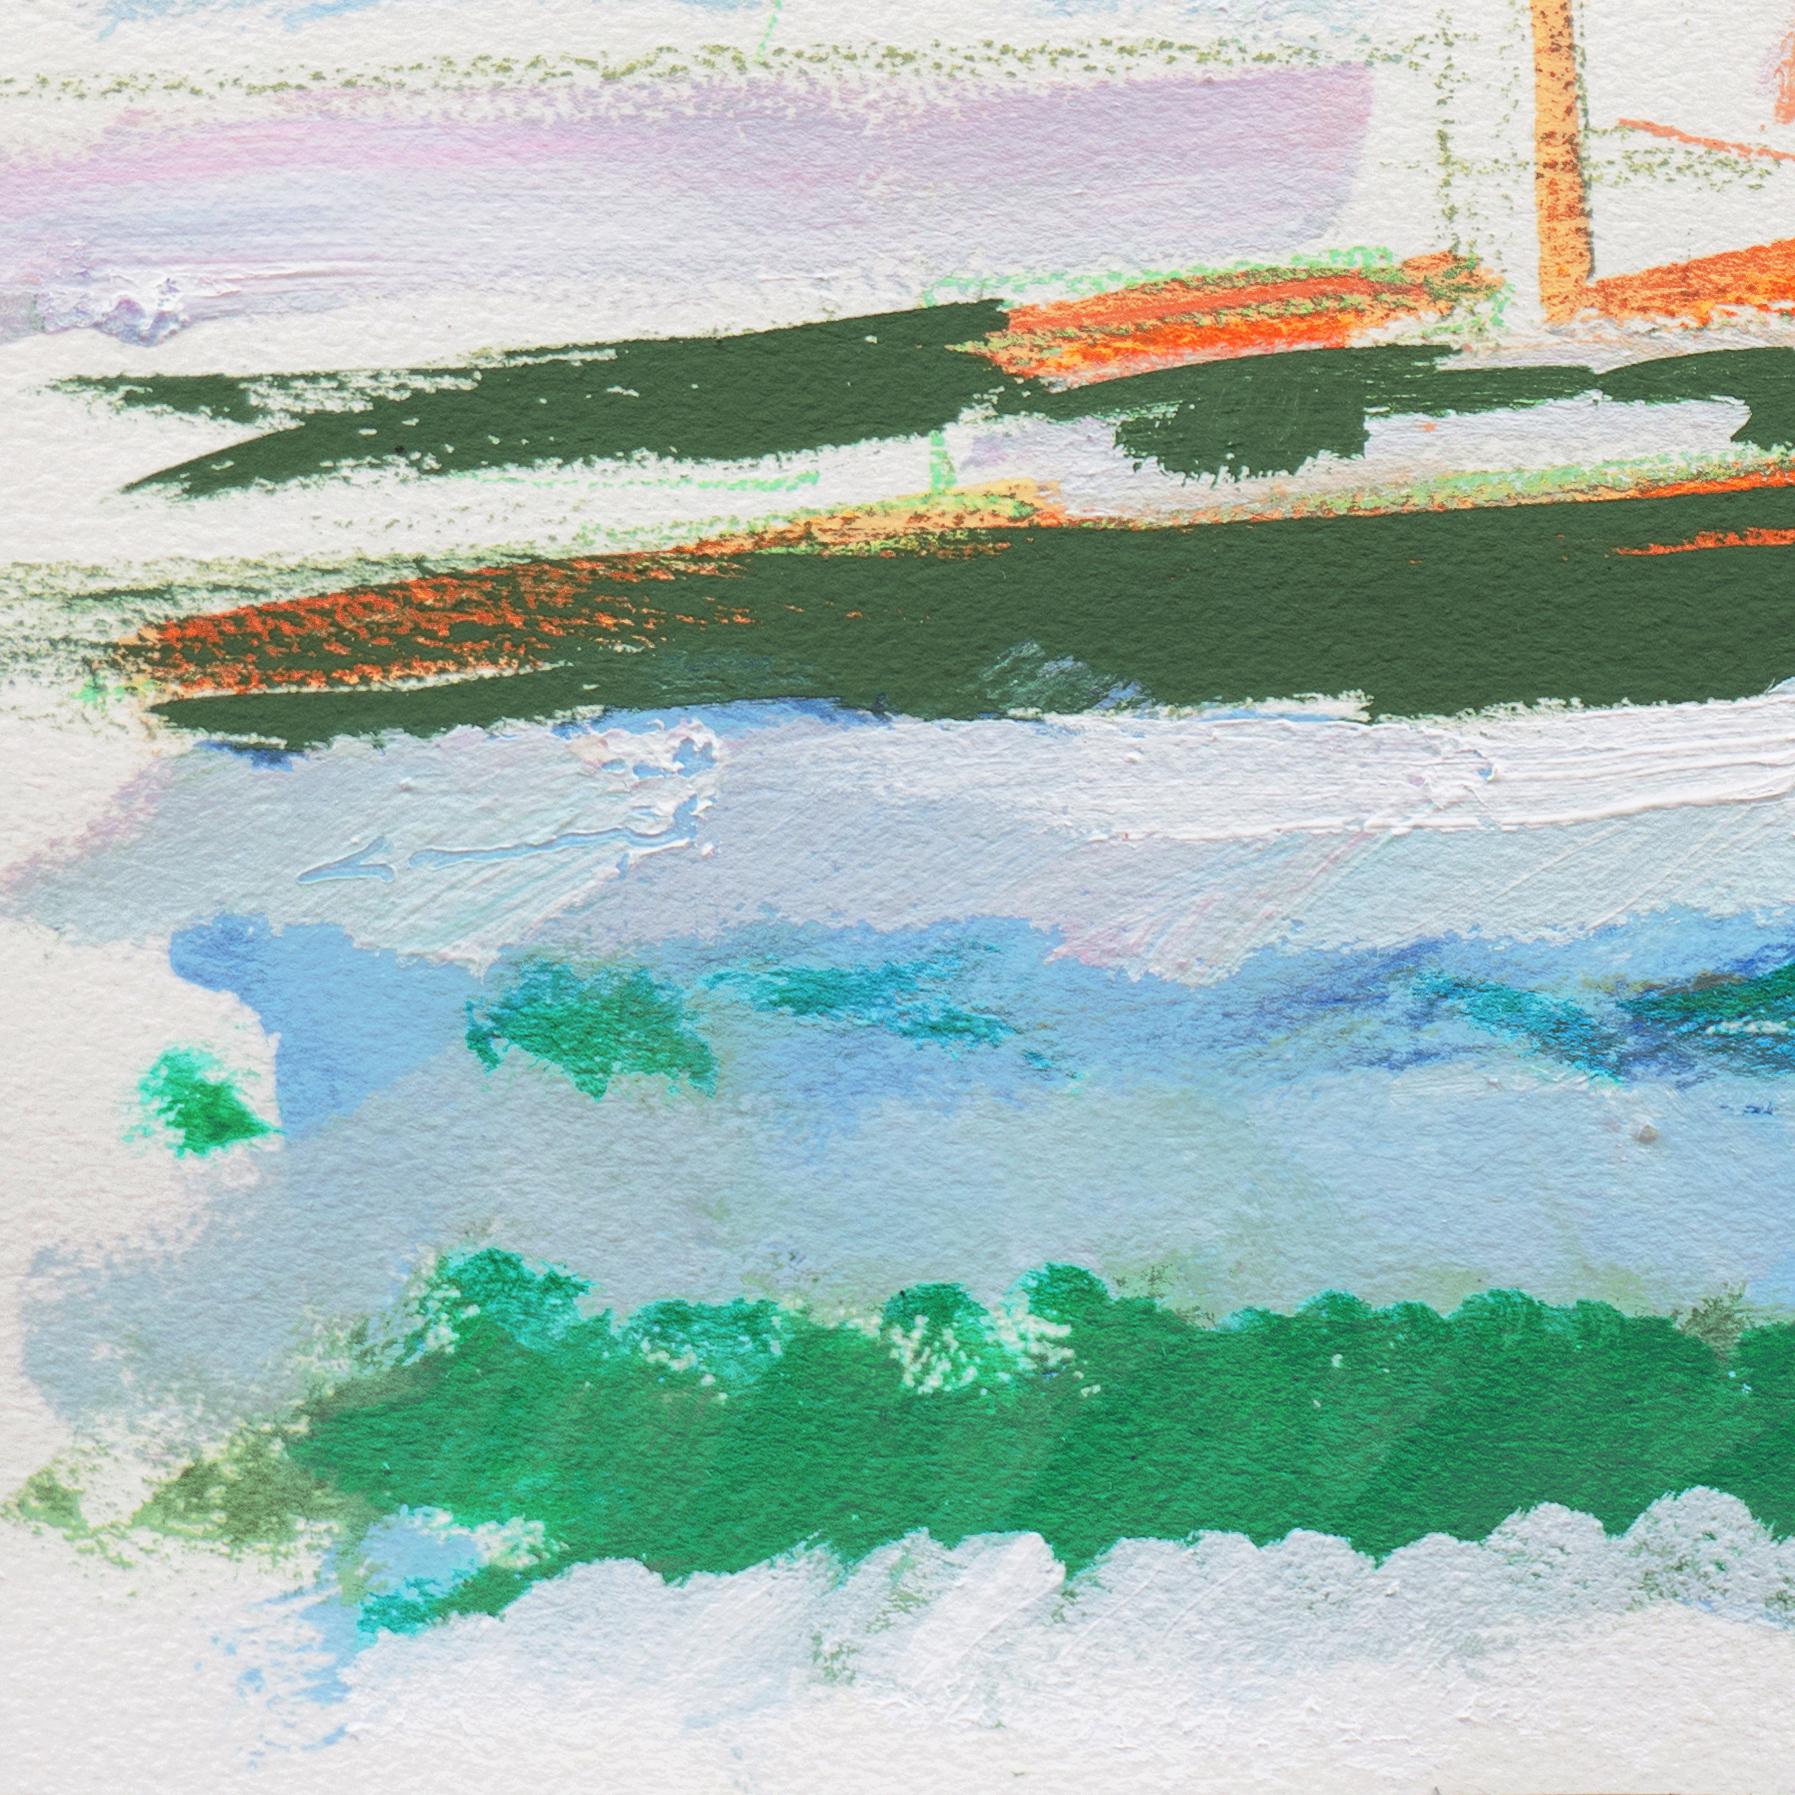 'Sailing Boats off Monterey', California Expressionist, Stanford, Carmel - Painting by Robert Canete